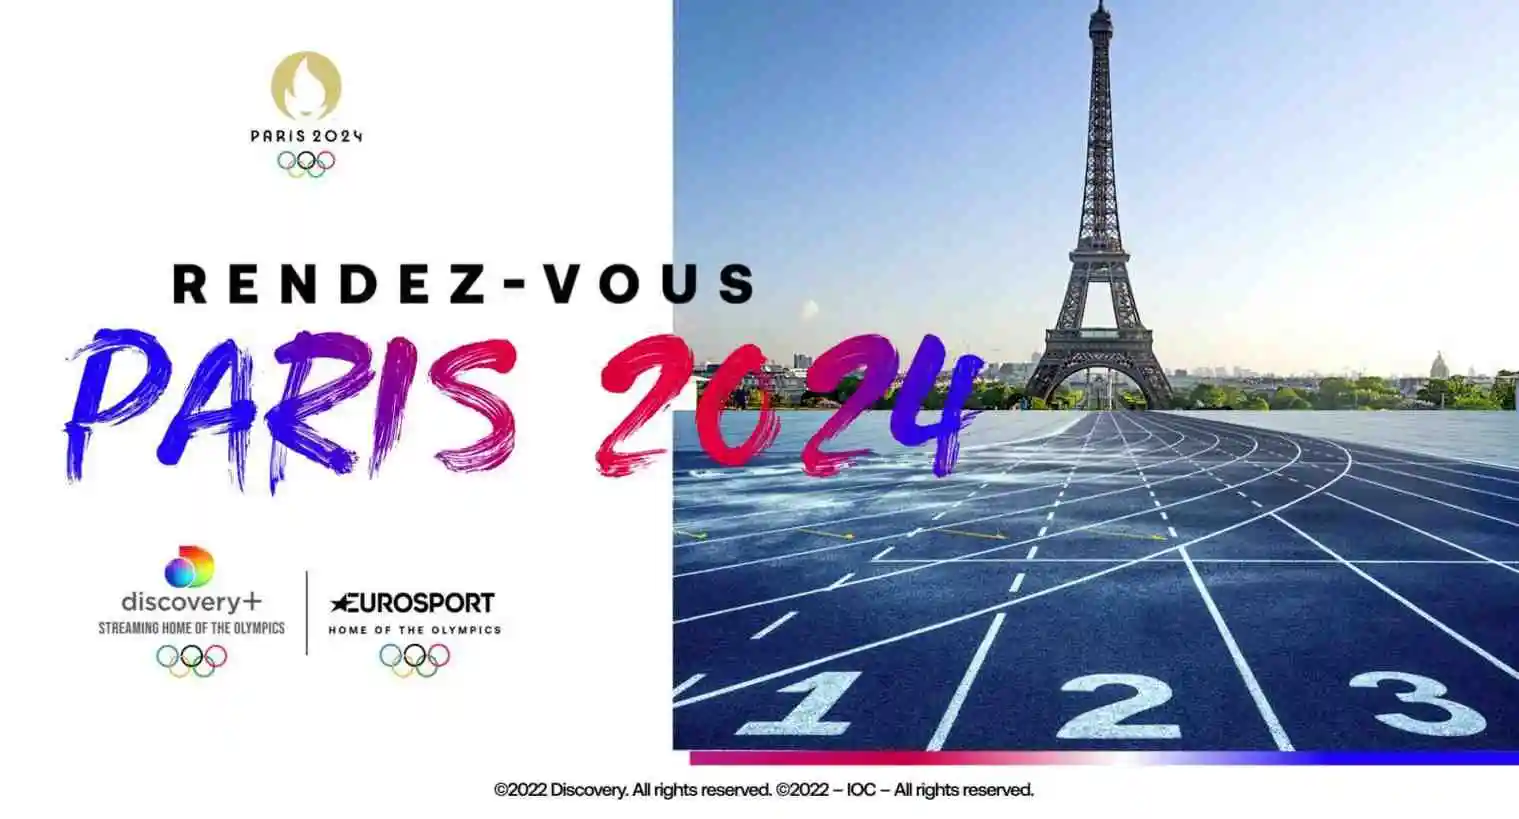 Paris 2024 Olympic Games, 6 extra Warner Bros. Discovery channels on DAZN